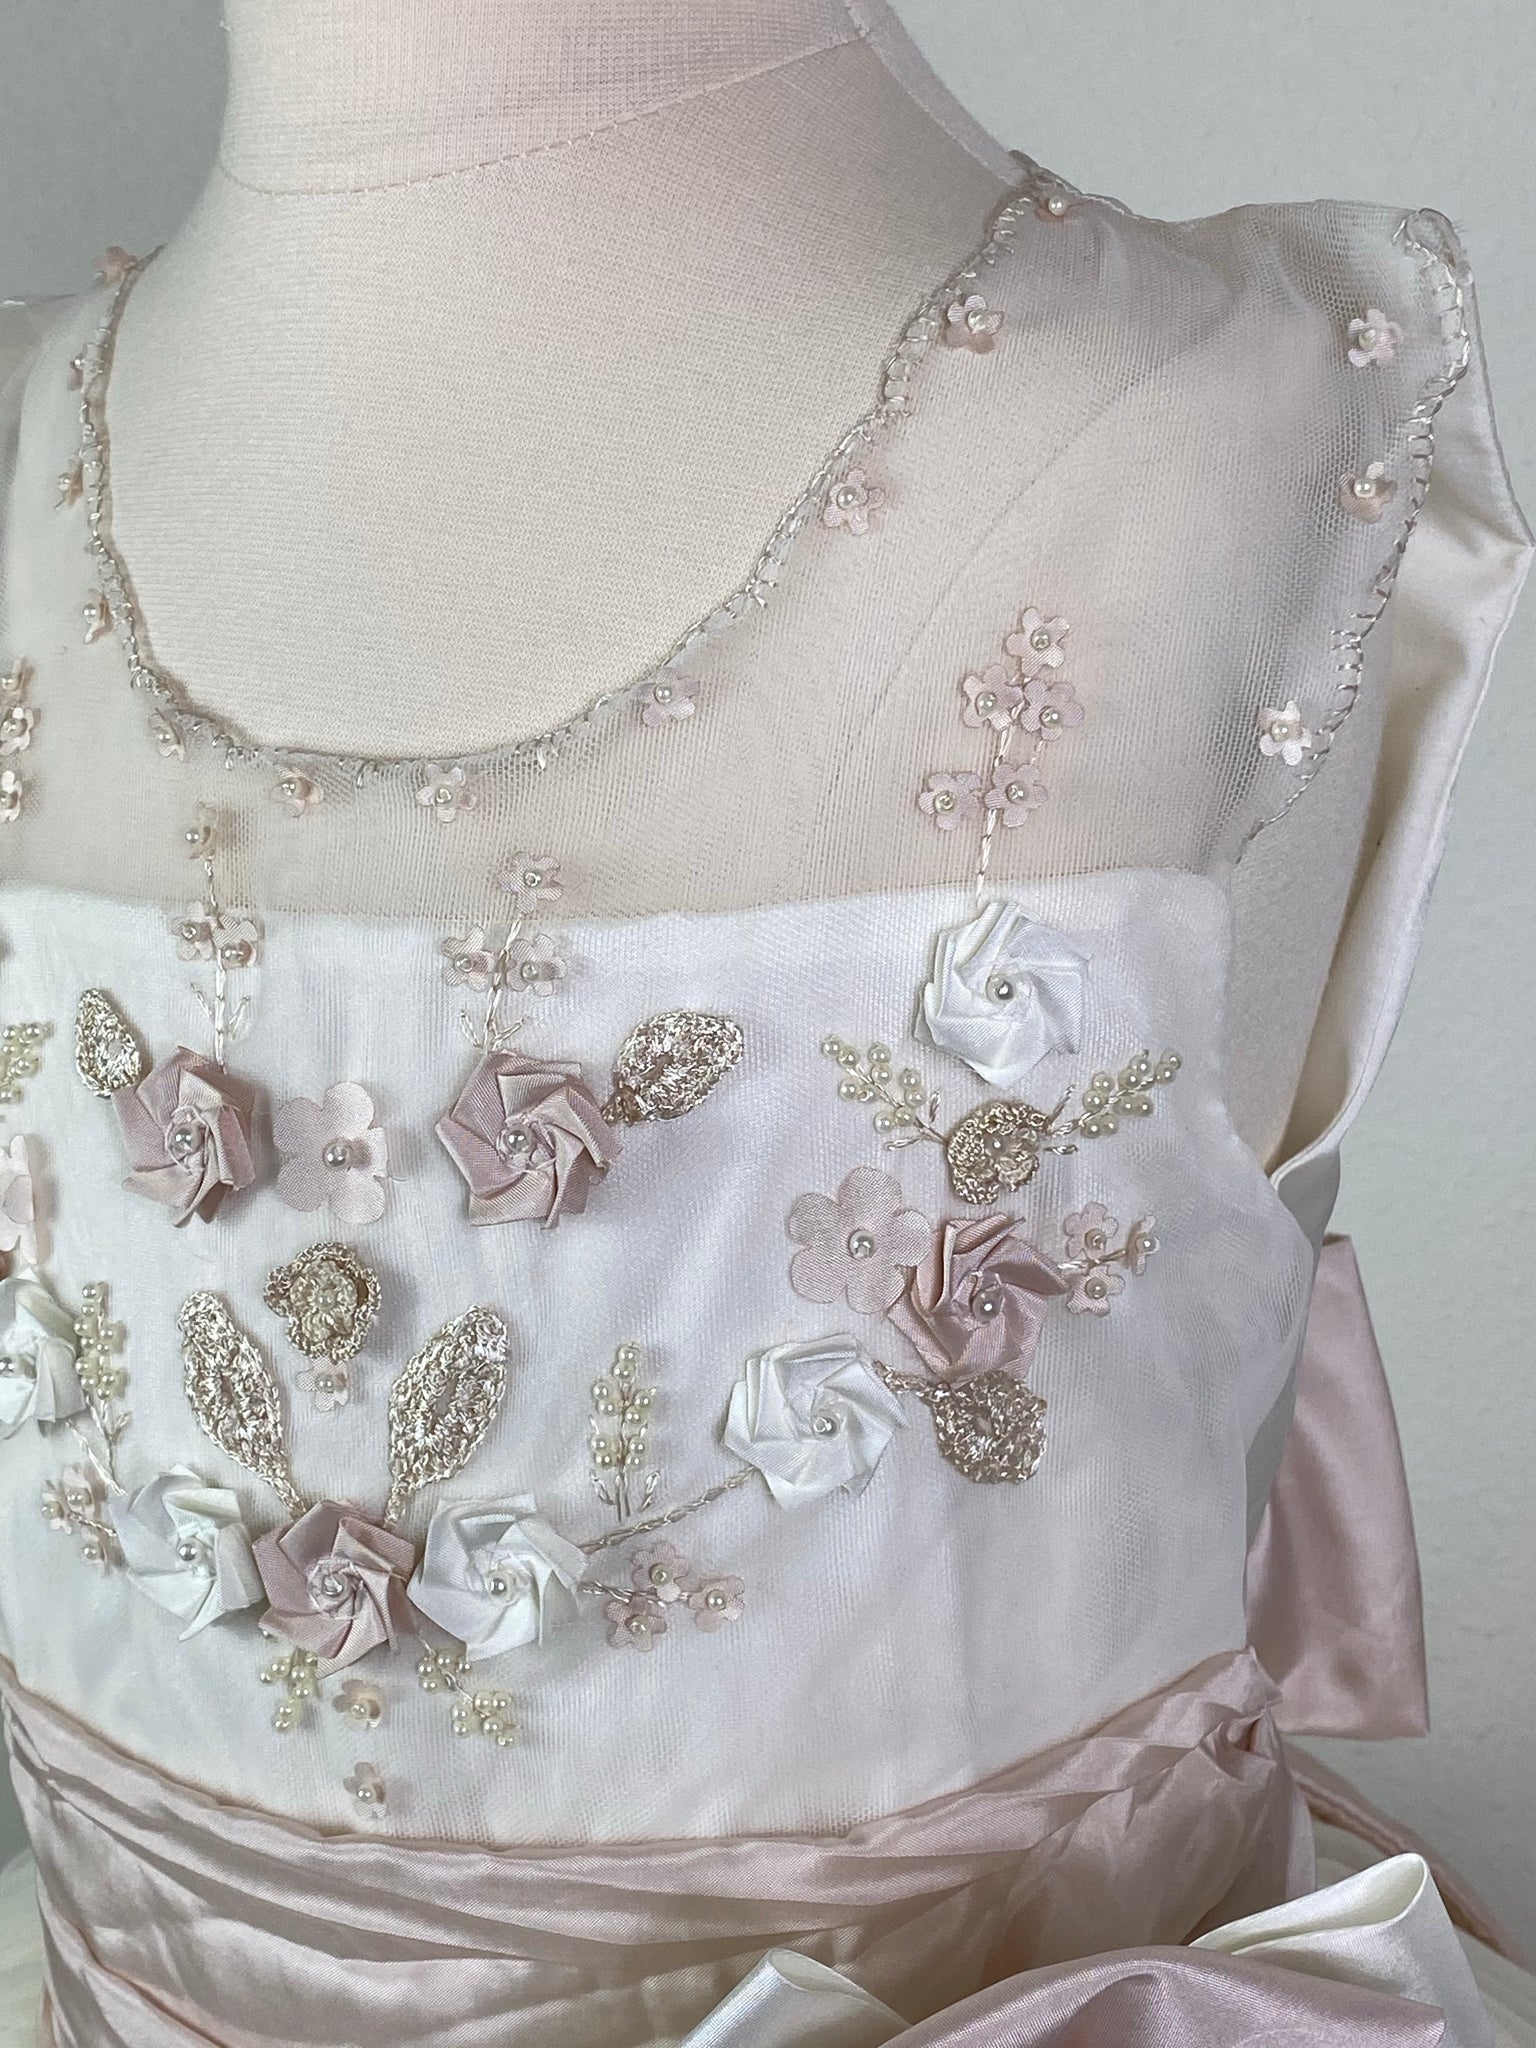 Ivory, size 10 Hand-stitched edging along arm holes and neckline Antique Rose and Ivory floral detailing with pearl center Antique Rose ruched cummerbund with pearl detailing in large bow Tulle skirt with antique rose satin trim Satin covered button closure Antique Rose ribboning for large bow Antique Rose satin trim